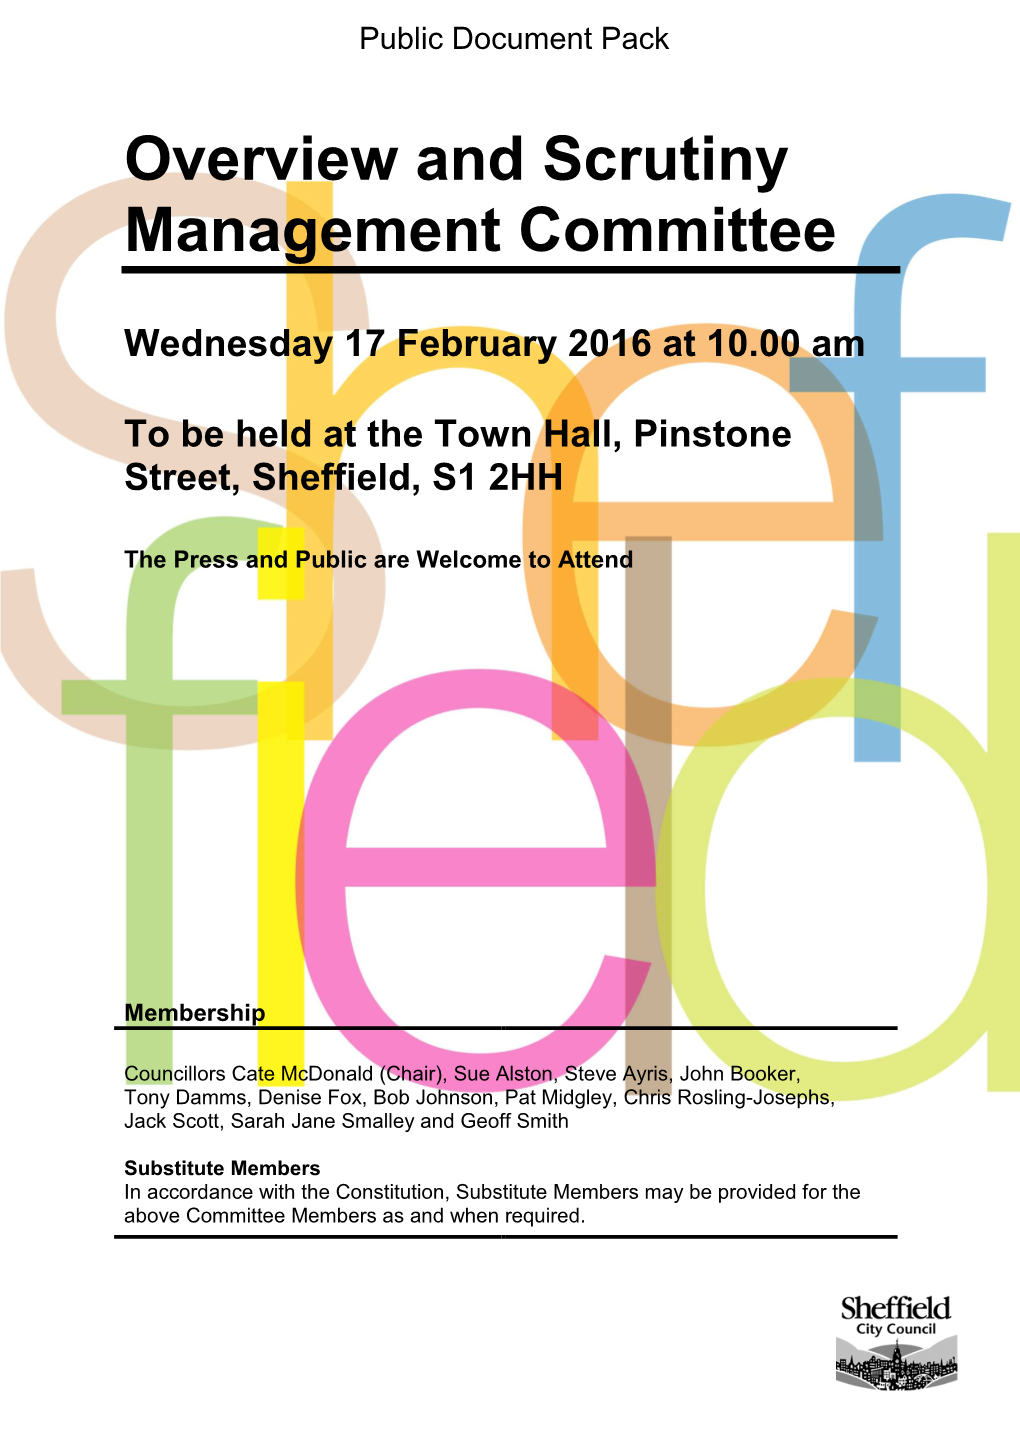 Overview and Scrutiny Management Committee